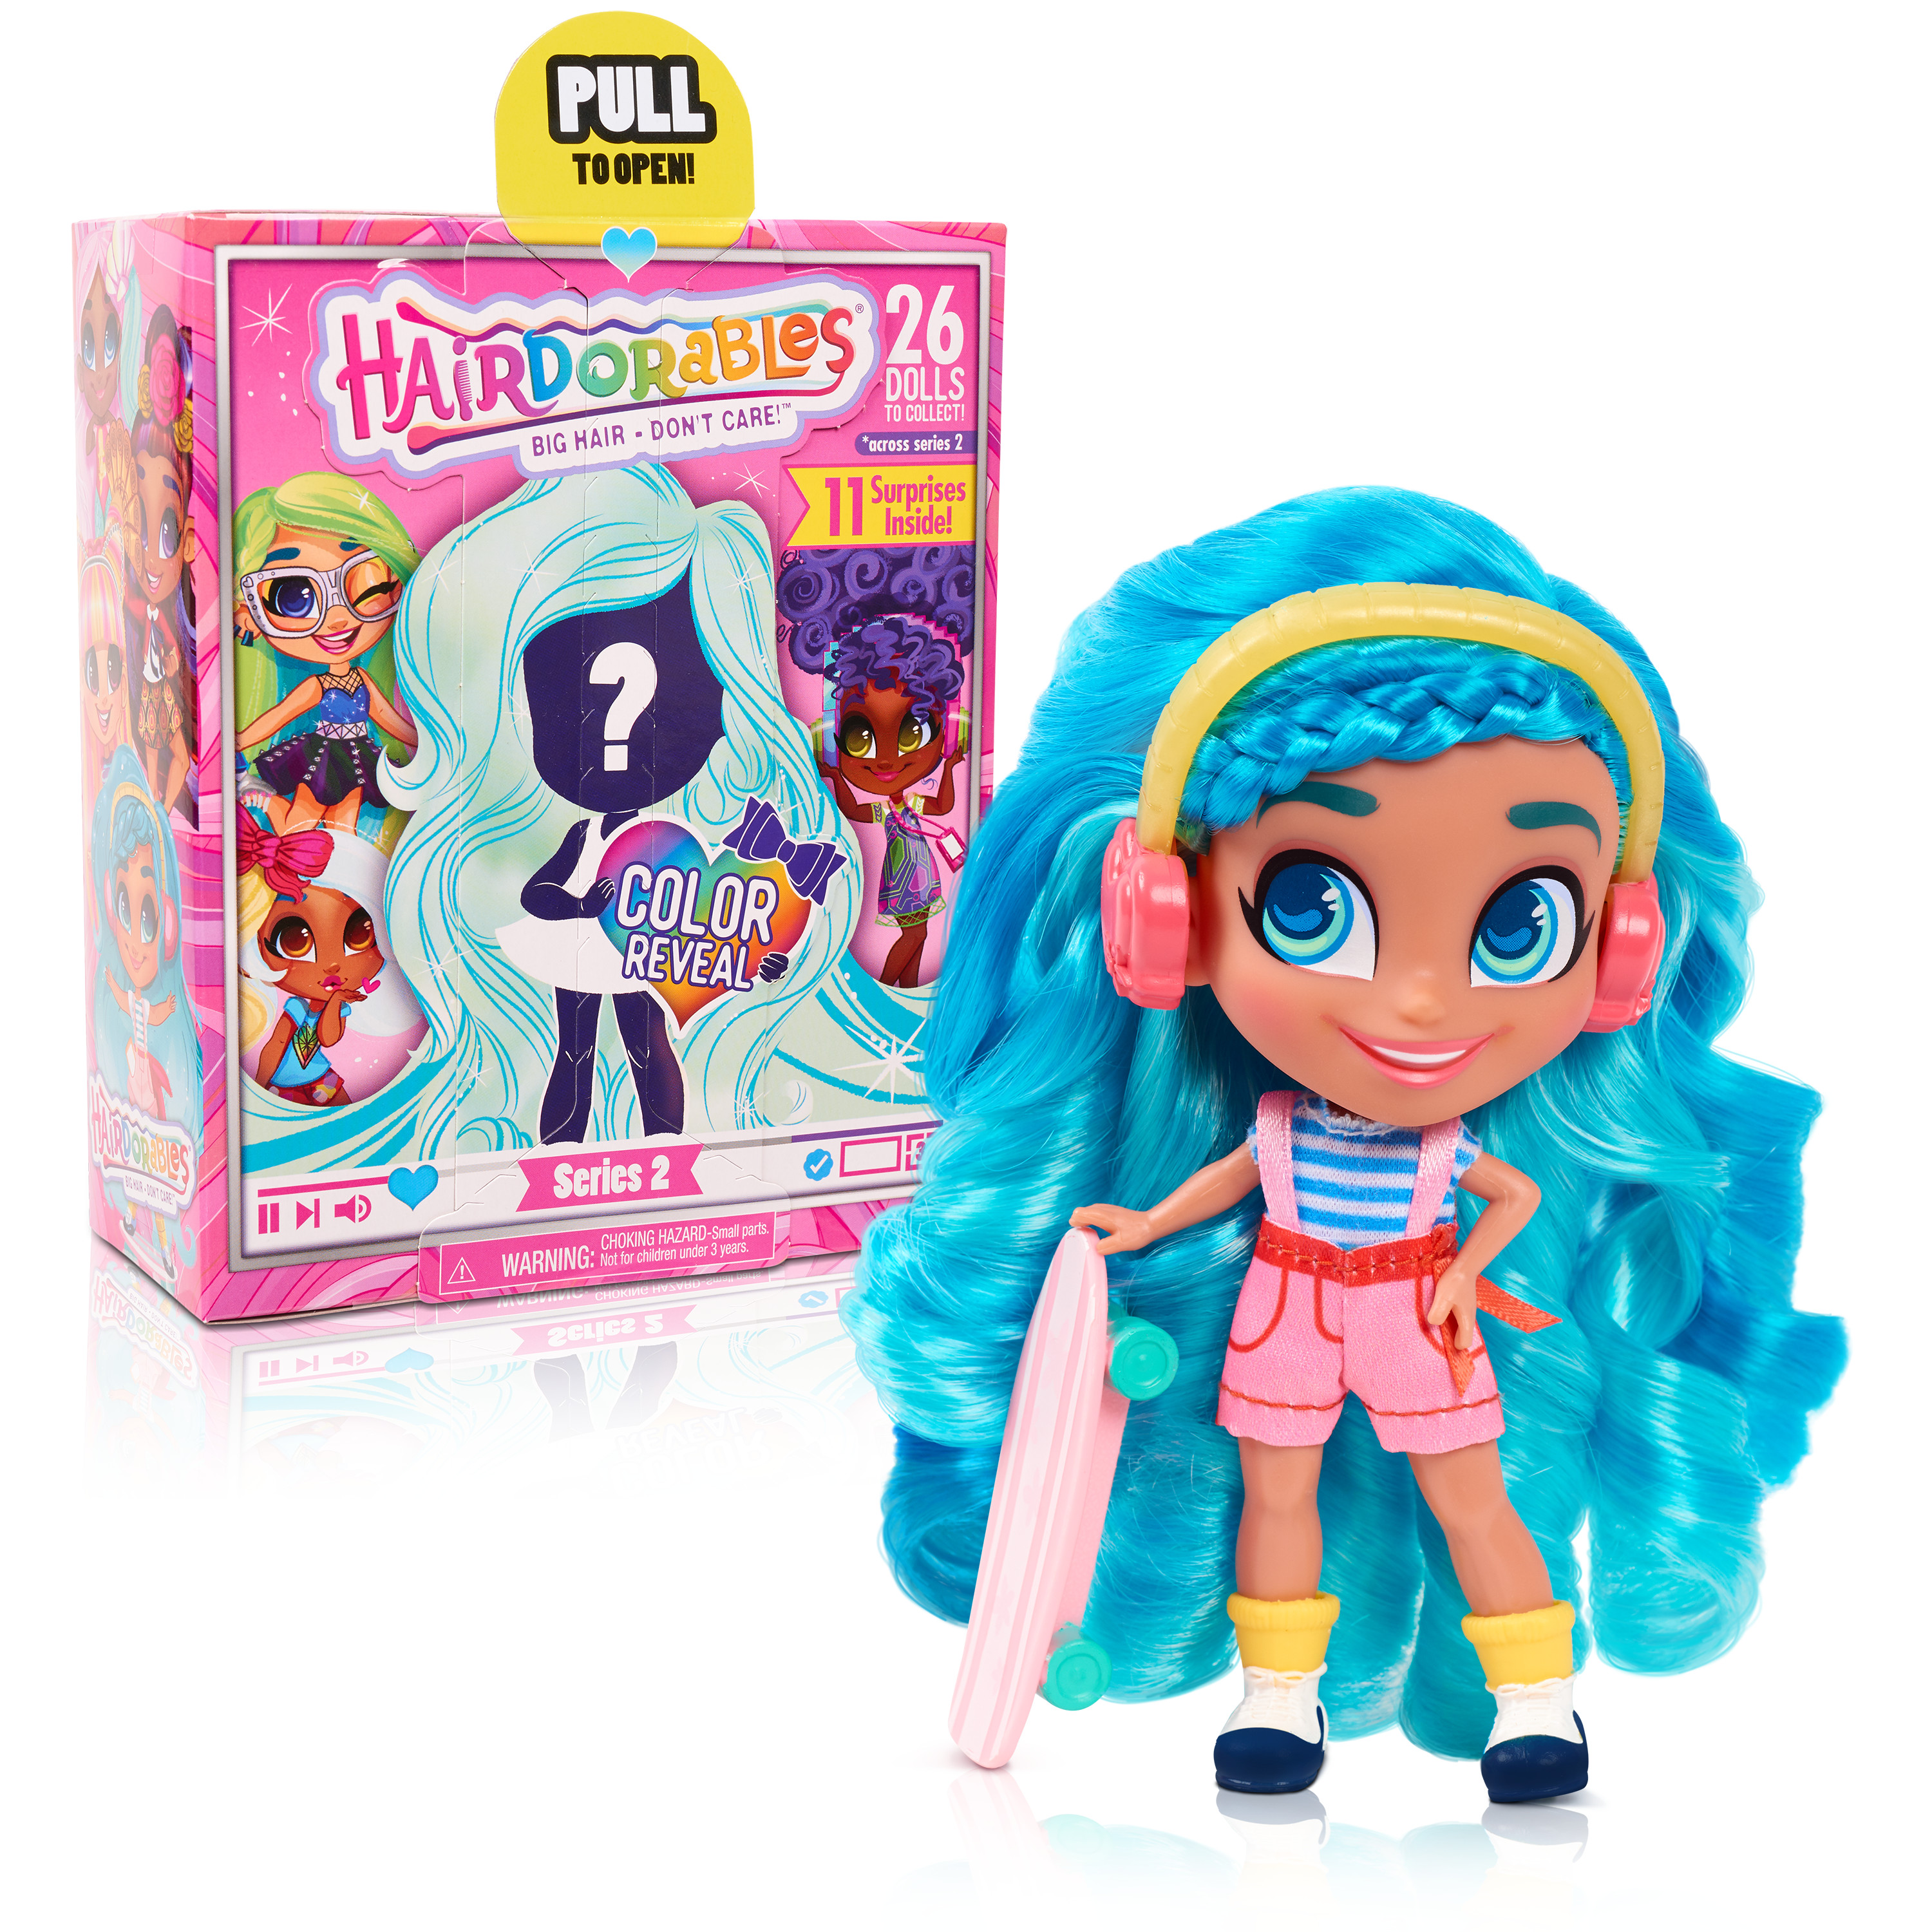 Hairdorables Collectible Dolls, Series 2, Styles May Vary,  Kids Toys for Ages 3 Up, Gifts and Presents - image 1 of 3